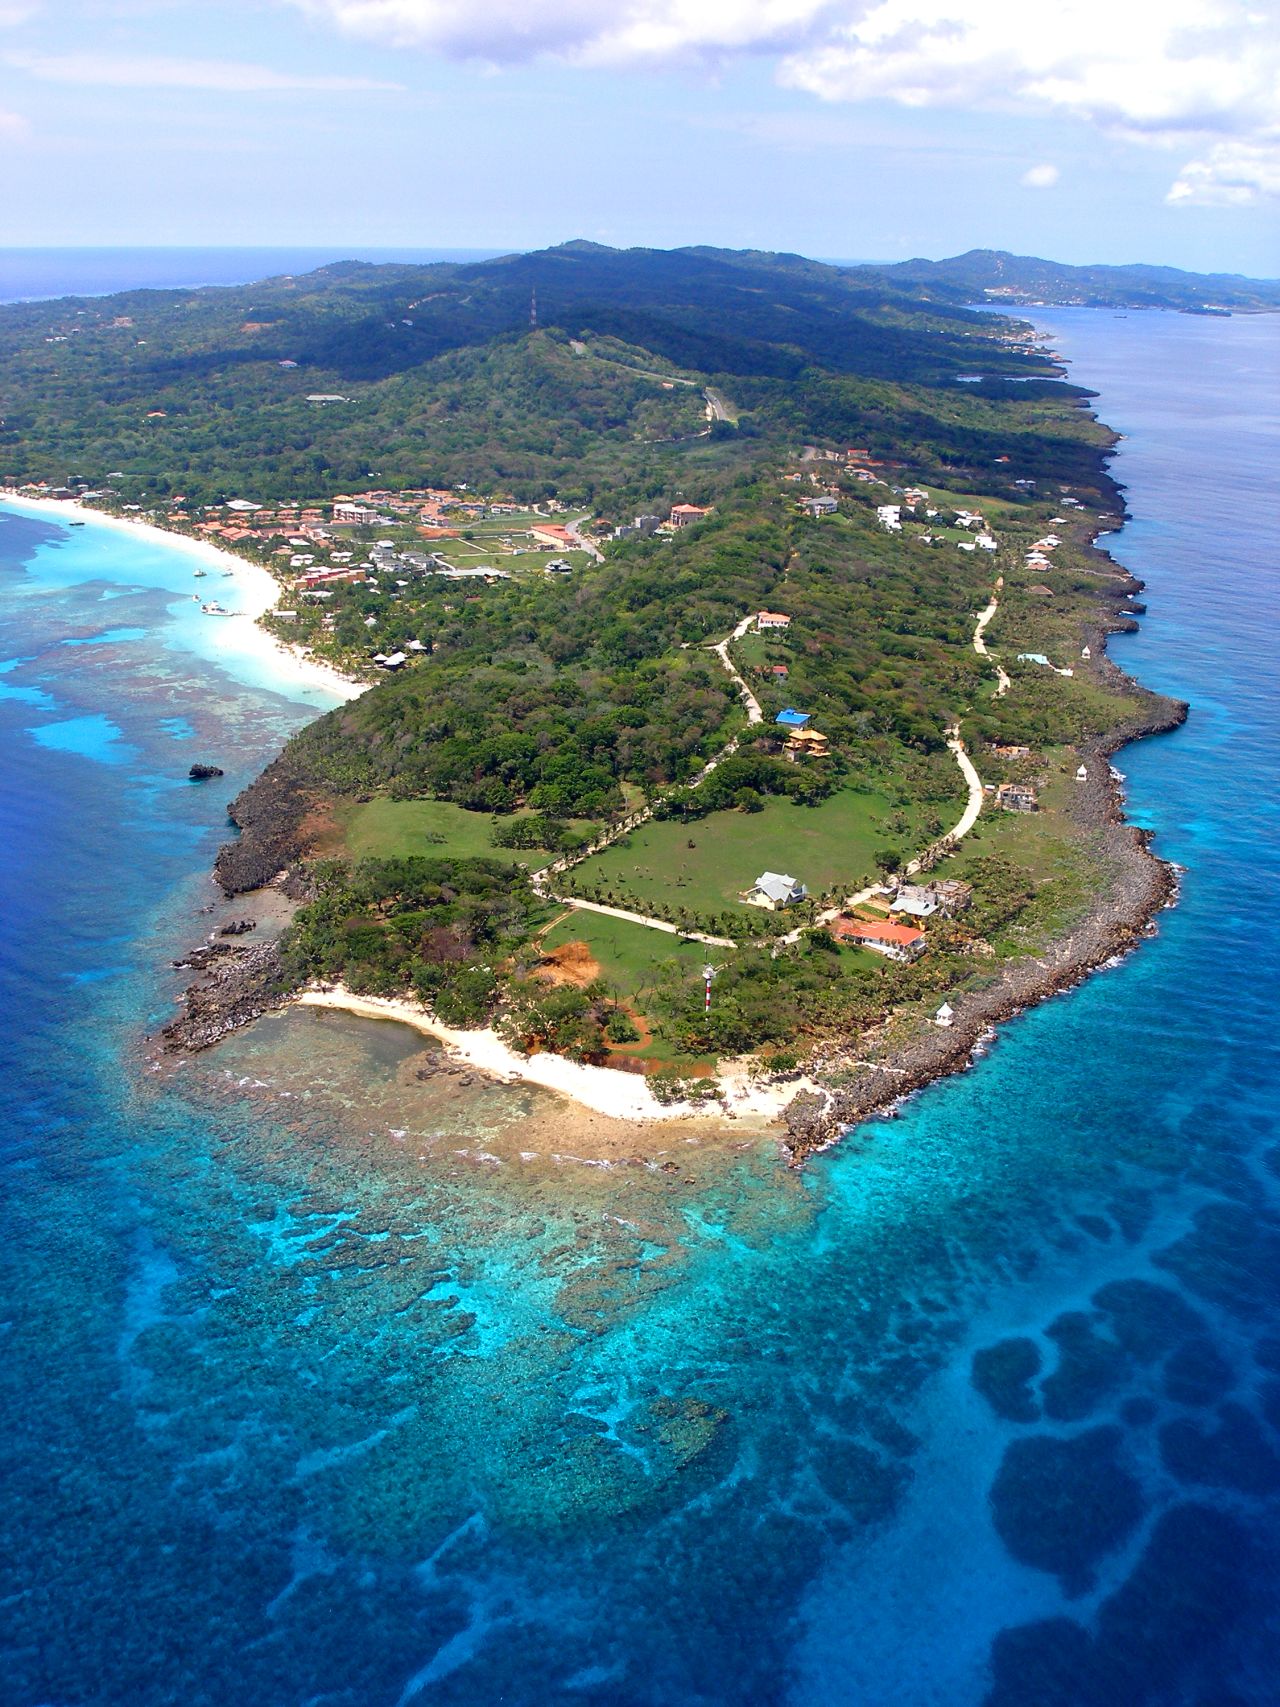 Located on the tropical island of Roatan, 35 miles off the coast of Honduras, the Pristine Bay Resort is situated on a 400-plus acre site adjacent to the Caribbean Sea. The 120-room, five-star Resort and Spa at Pristine Bay is scheduled to open January 2012.